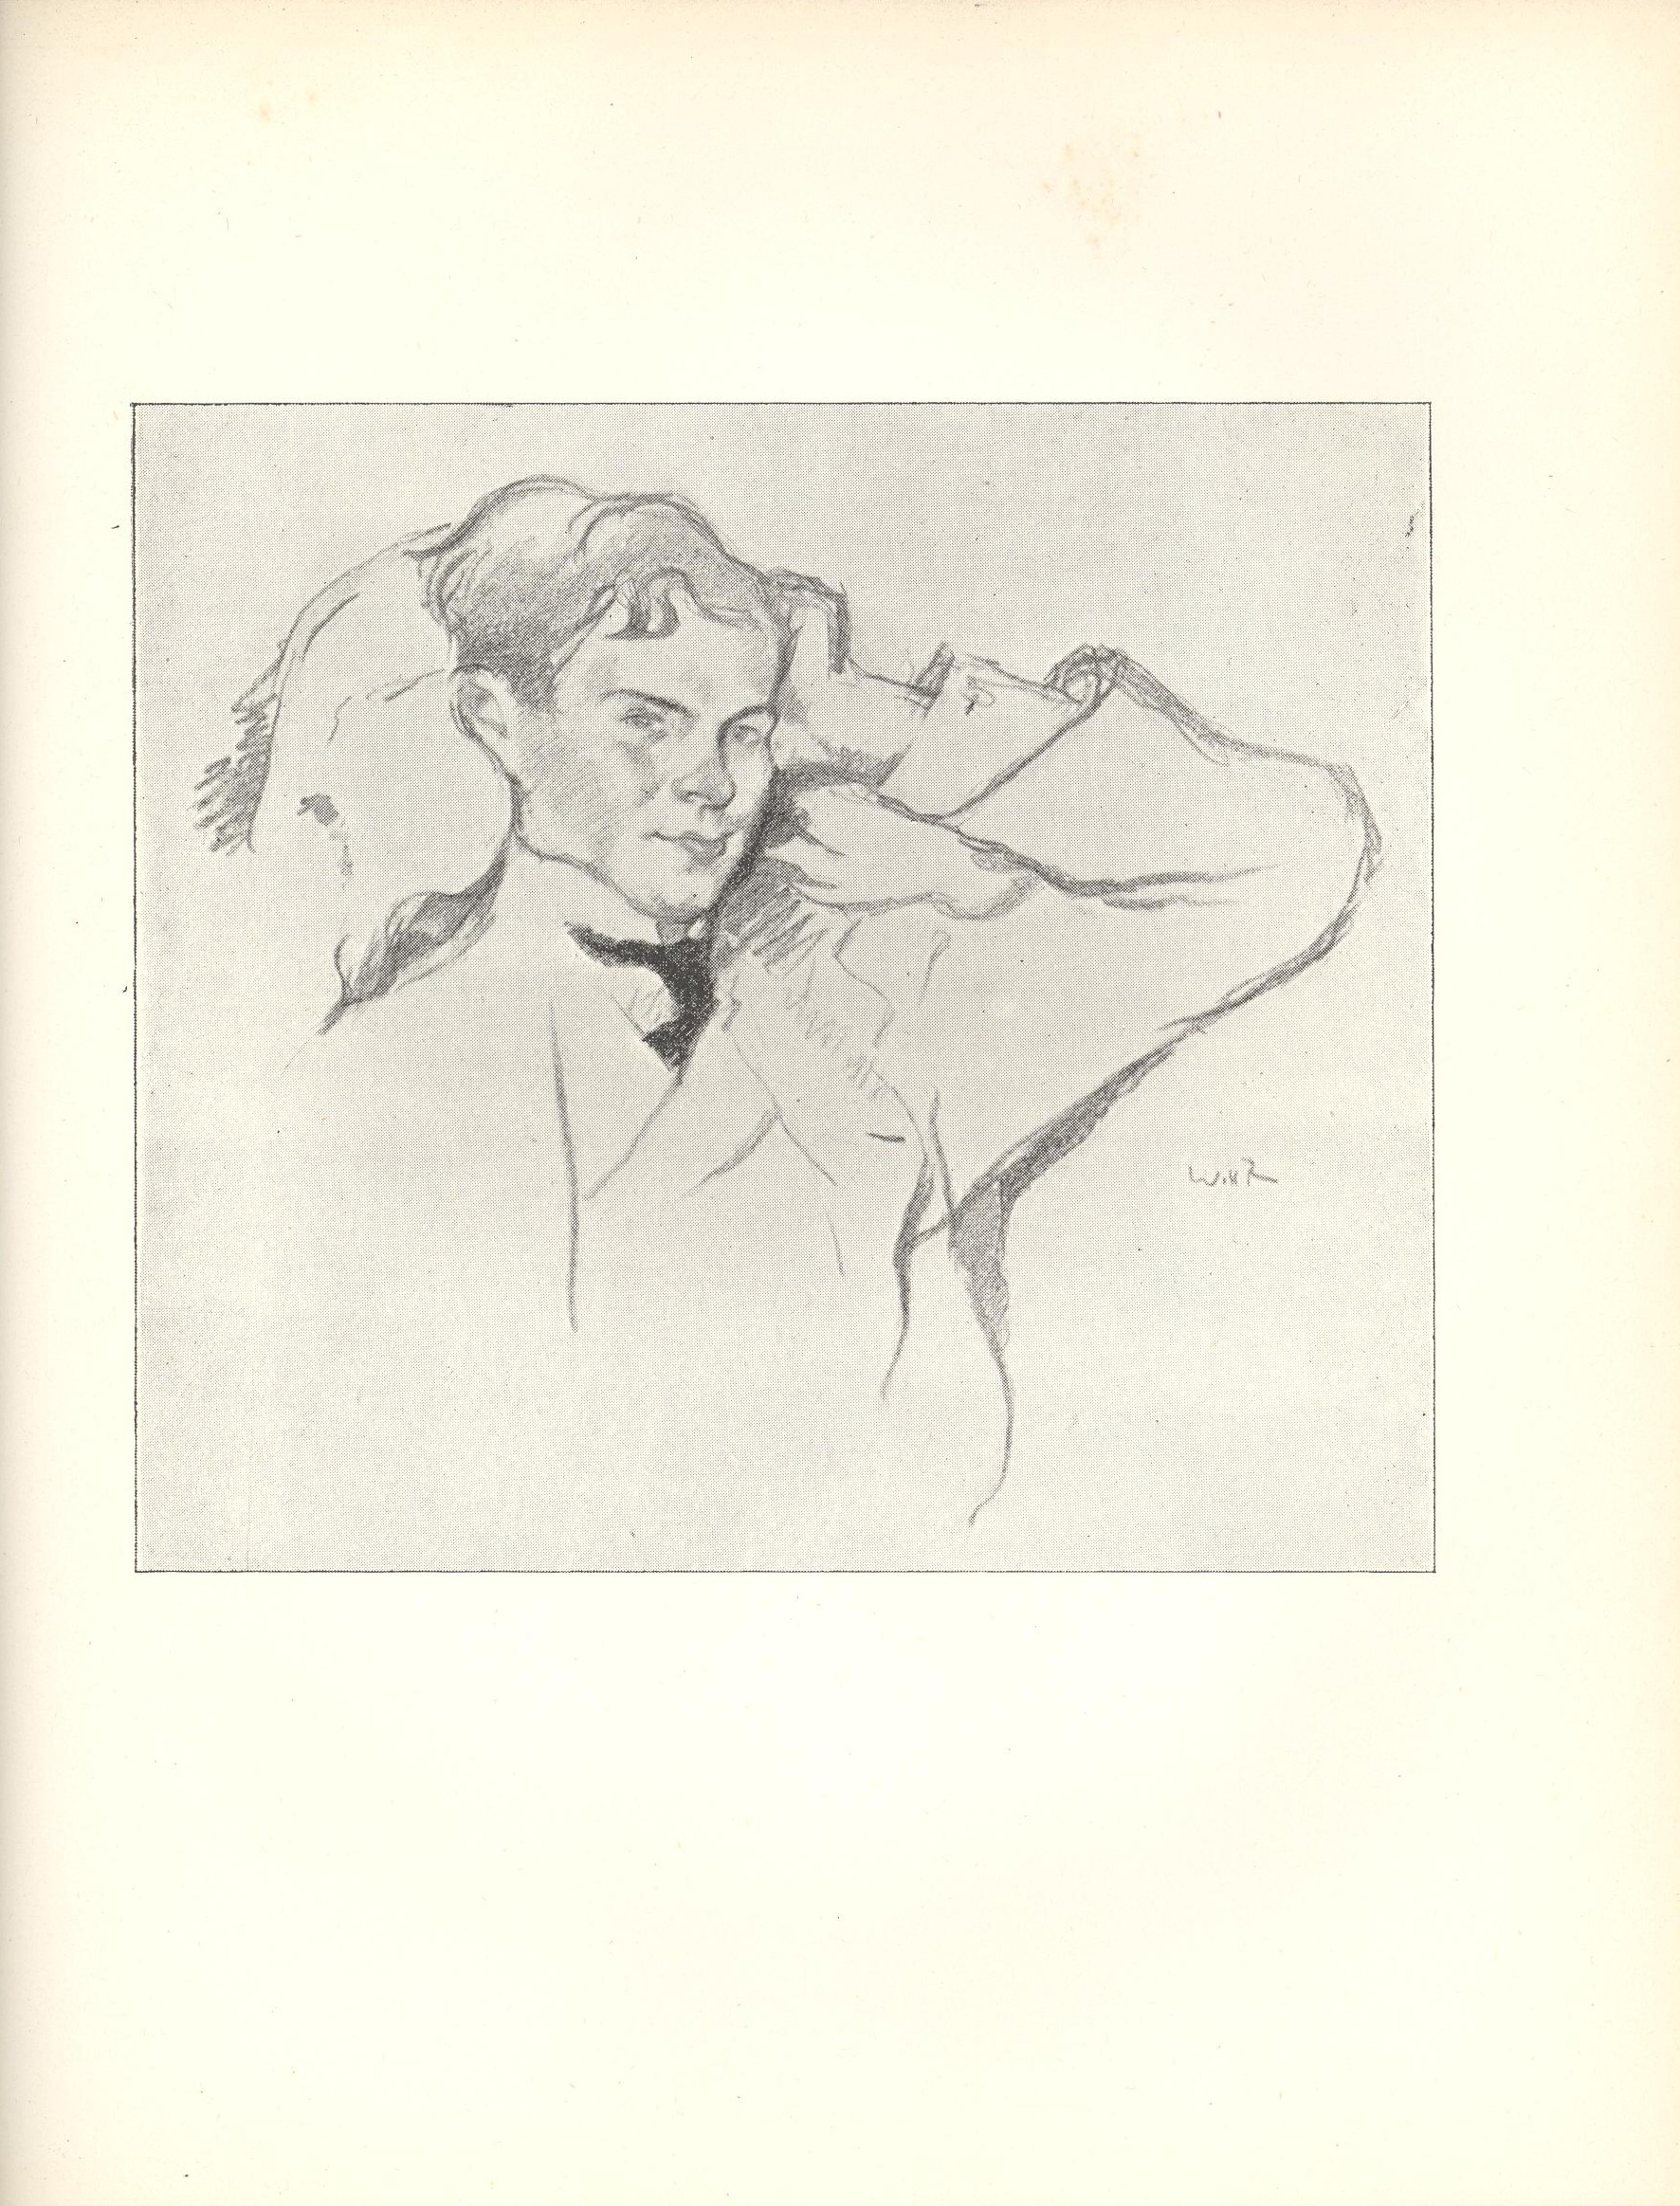 Image is a sketch of a young man the background is open white His head is leaning against a pillow in a 3 4 profile with his body slightly left of centre The pillow and his torso take up most of the space on the left half of the image His left arm is raised up to rest on his temple taking up the right side of the frame He is wearing a suit and tie Artist s name is on the middle right side of image under the man s arm The image is vertically displayed